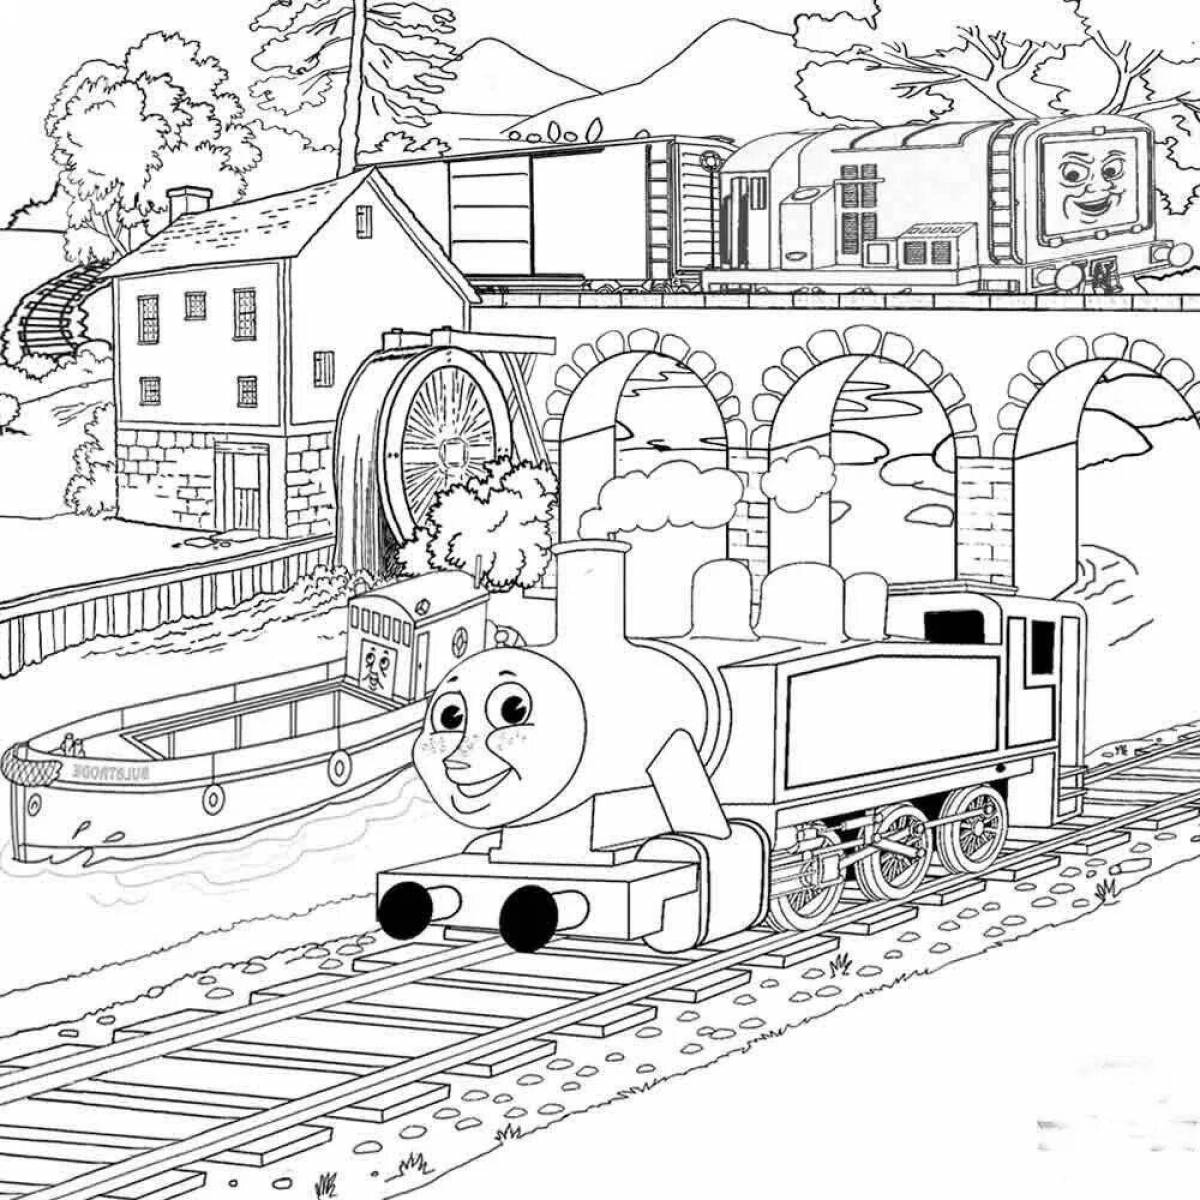 Coloring the incredible thomas the tank engine